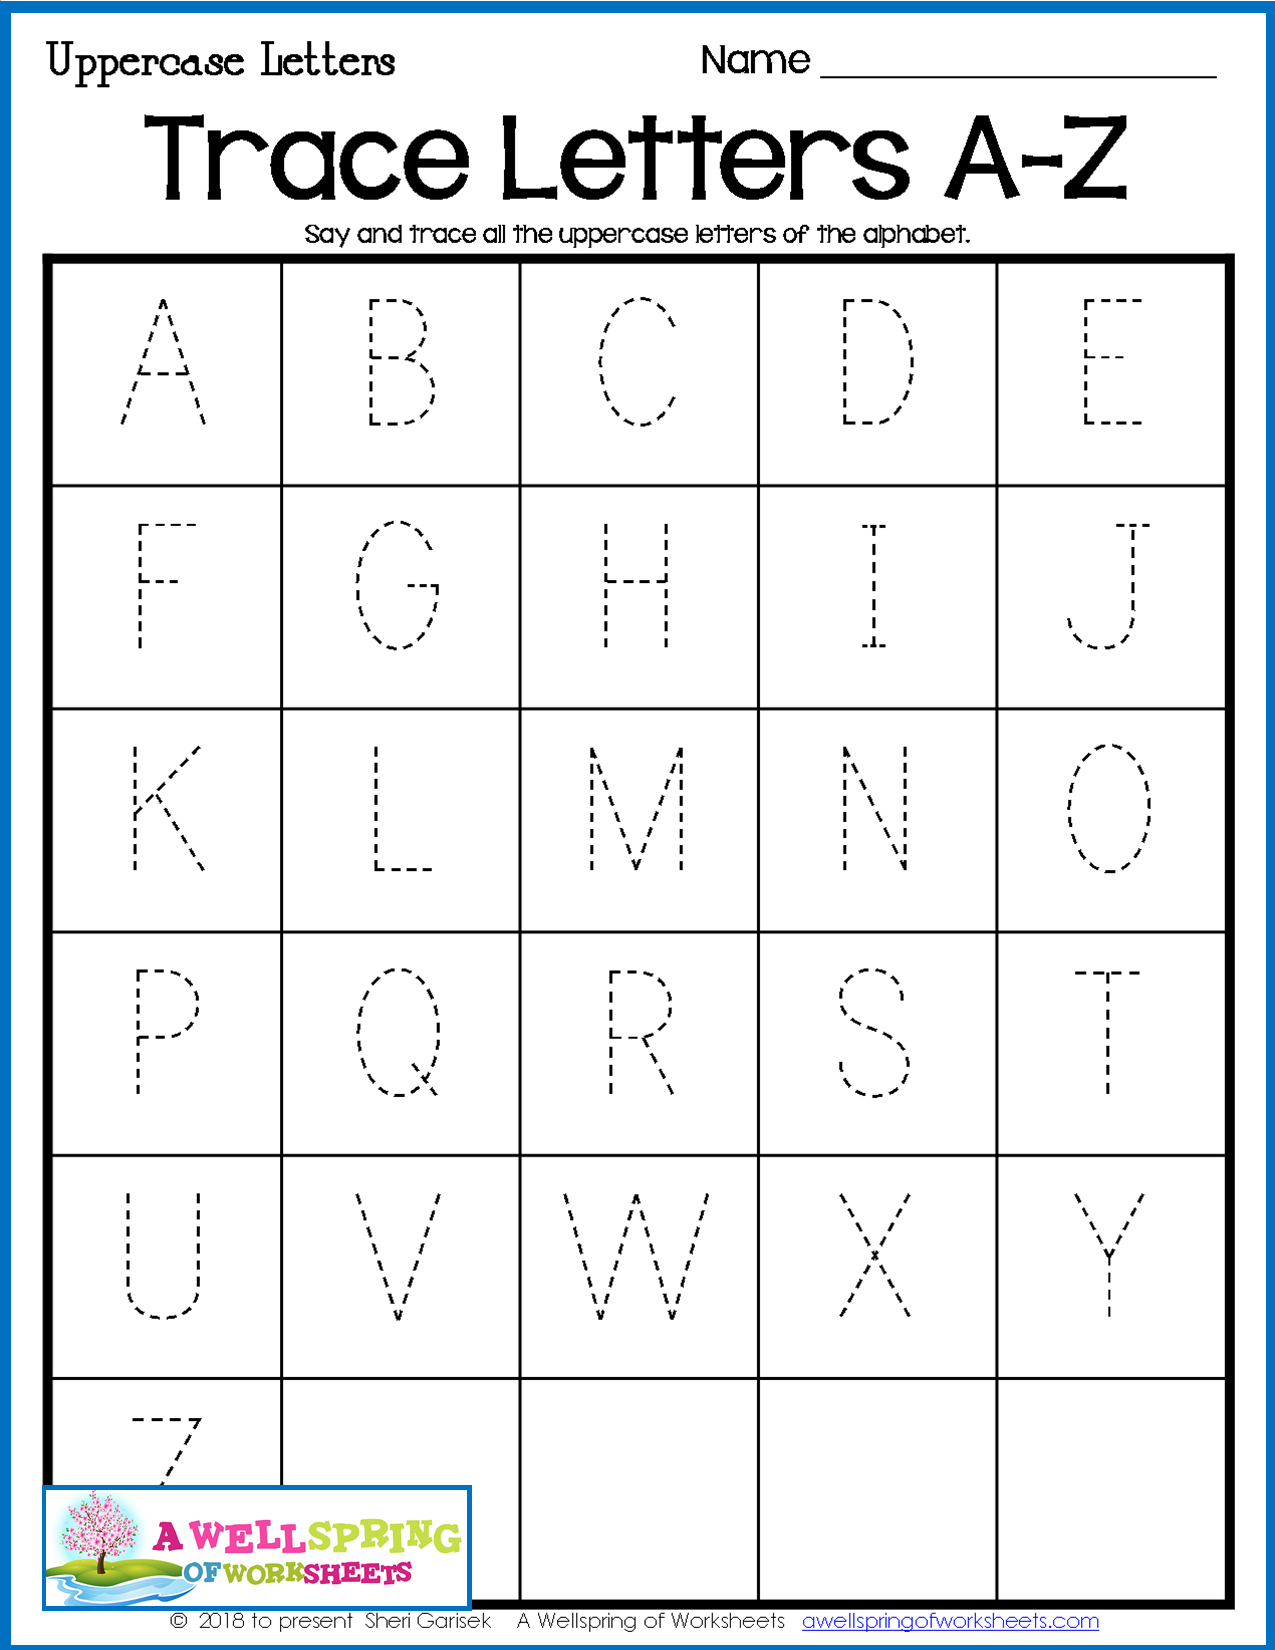 Coloring Book : Alphabetg Worksheets Coloring Book intended for Capital Letters Alphabet Tracing Sheets